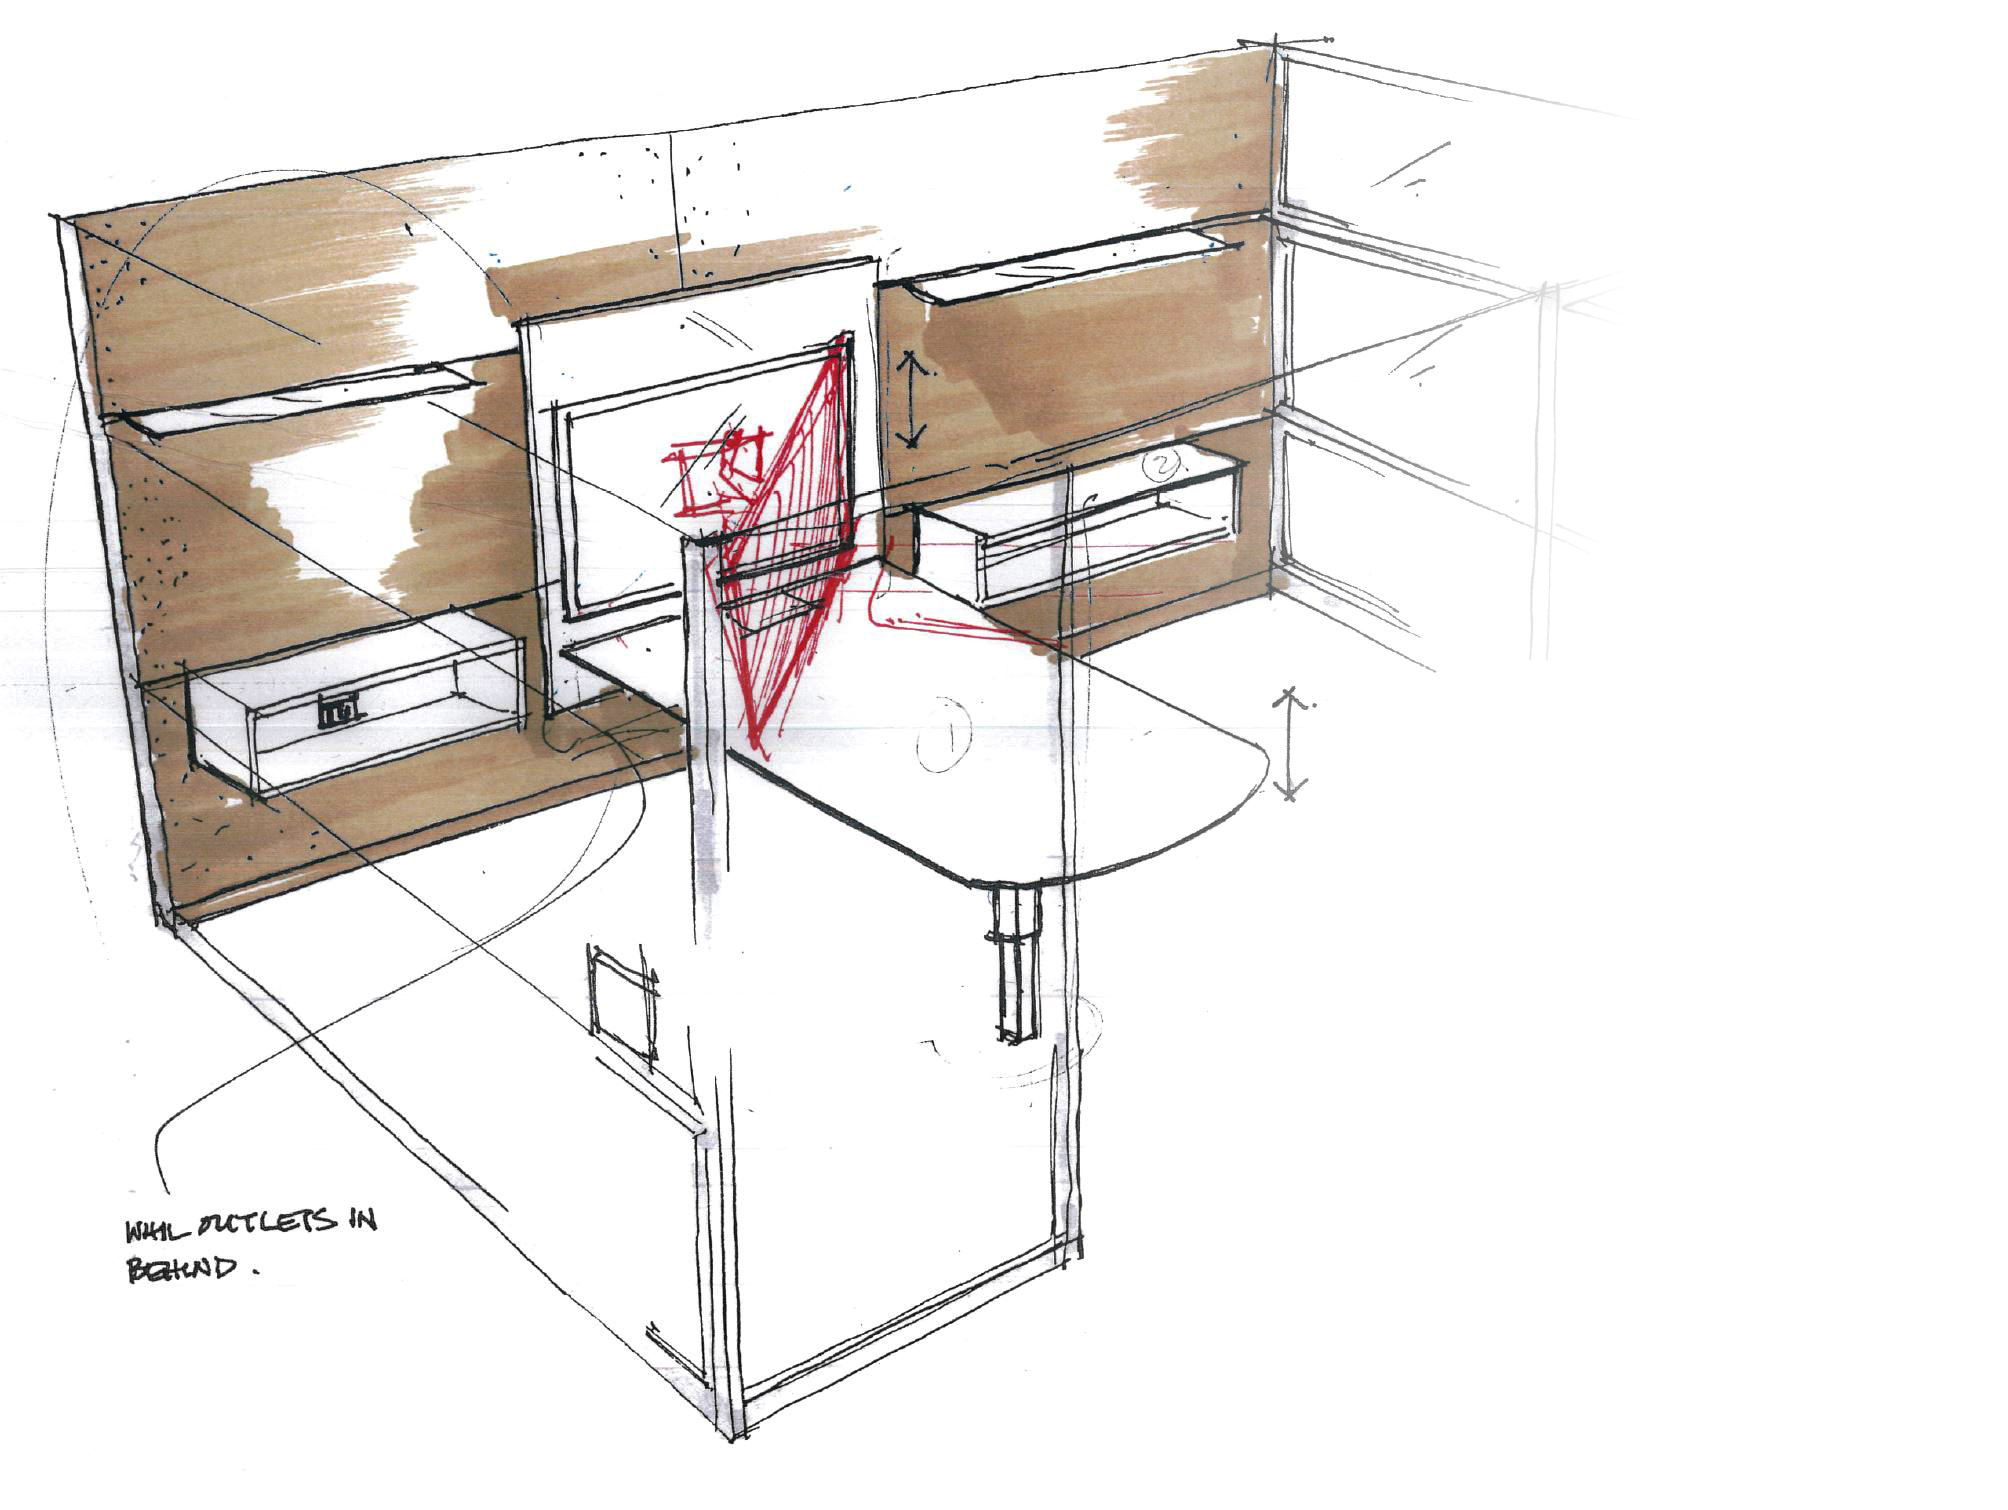  Initial concept sketch to demonstrate the monitor and work surface moving together. 